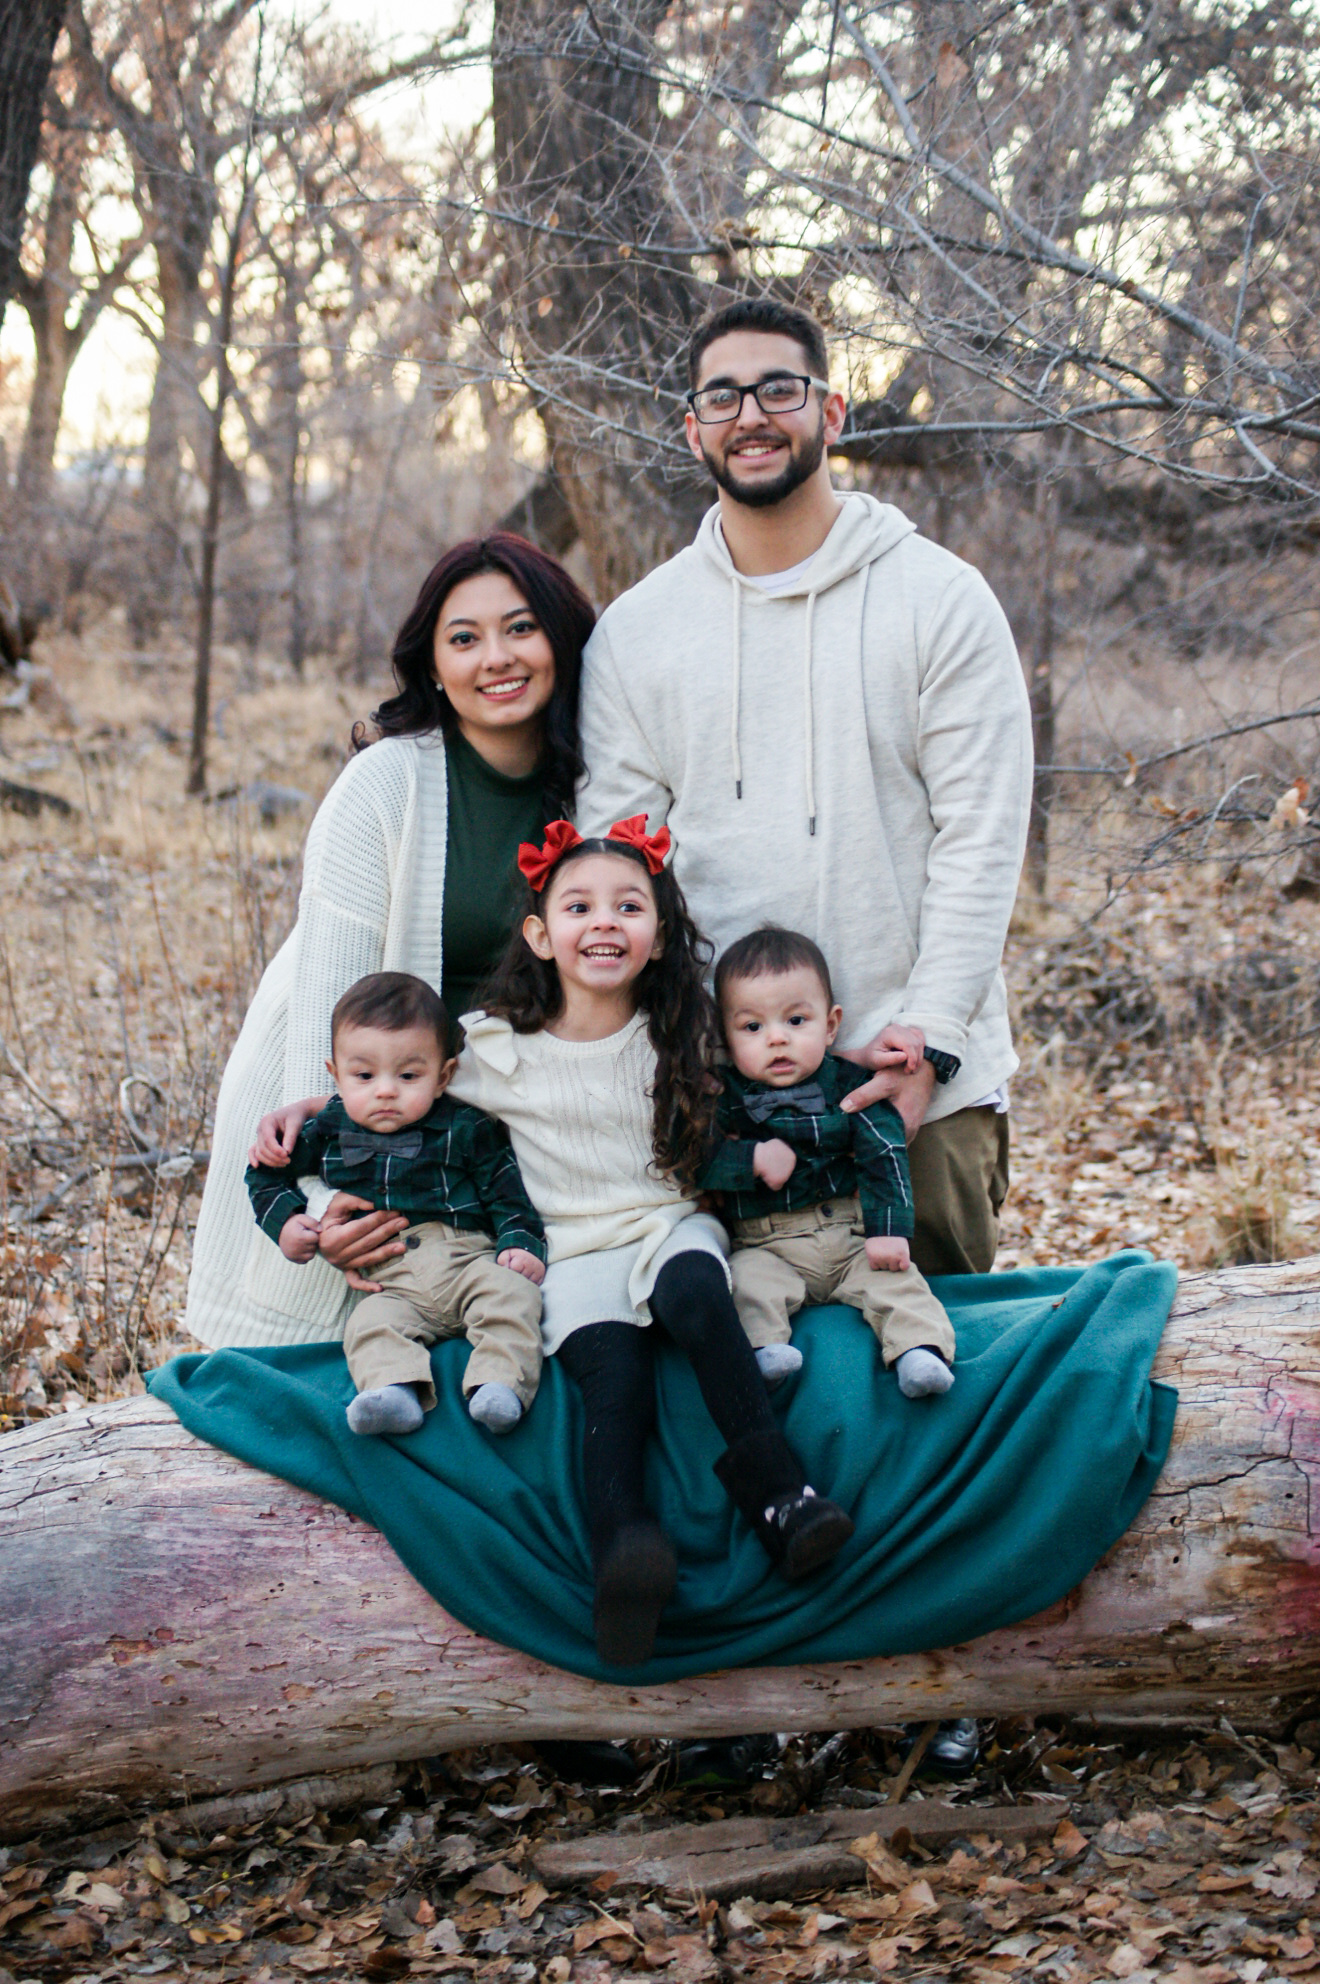 Heart Stories - Miranda Marquez's PPCM Story - Family Picture